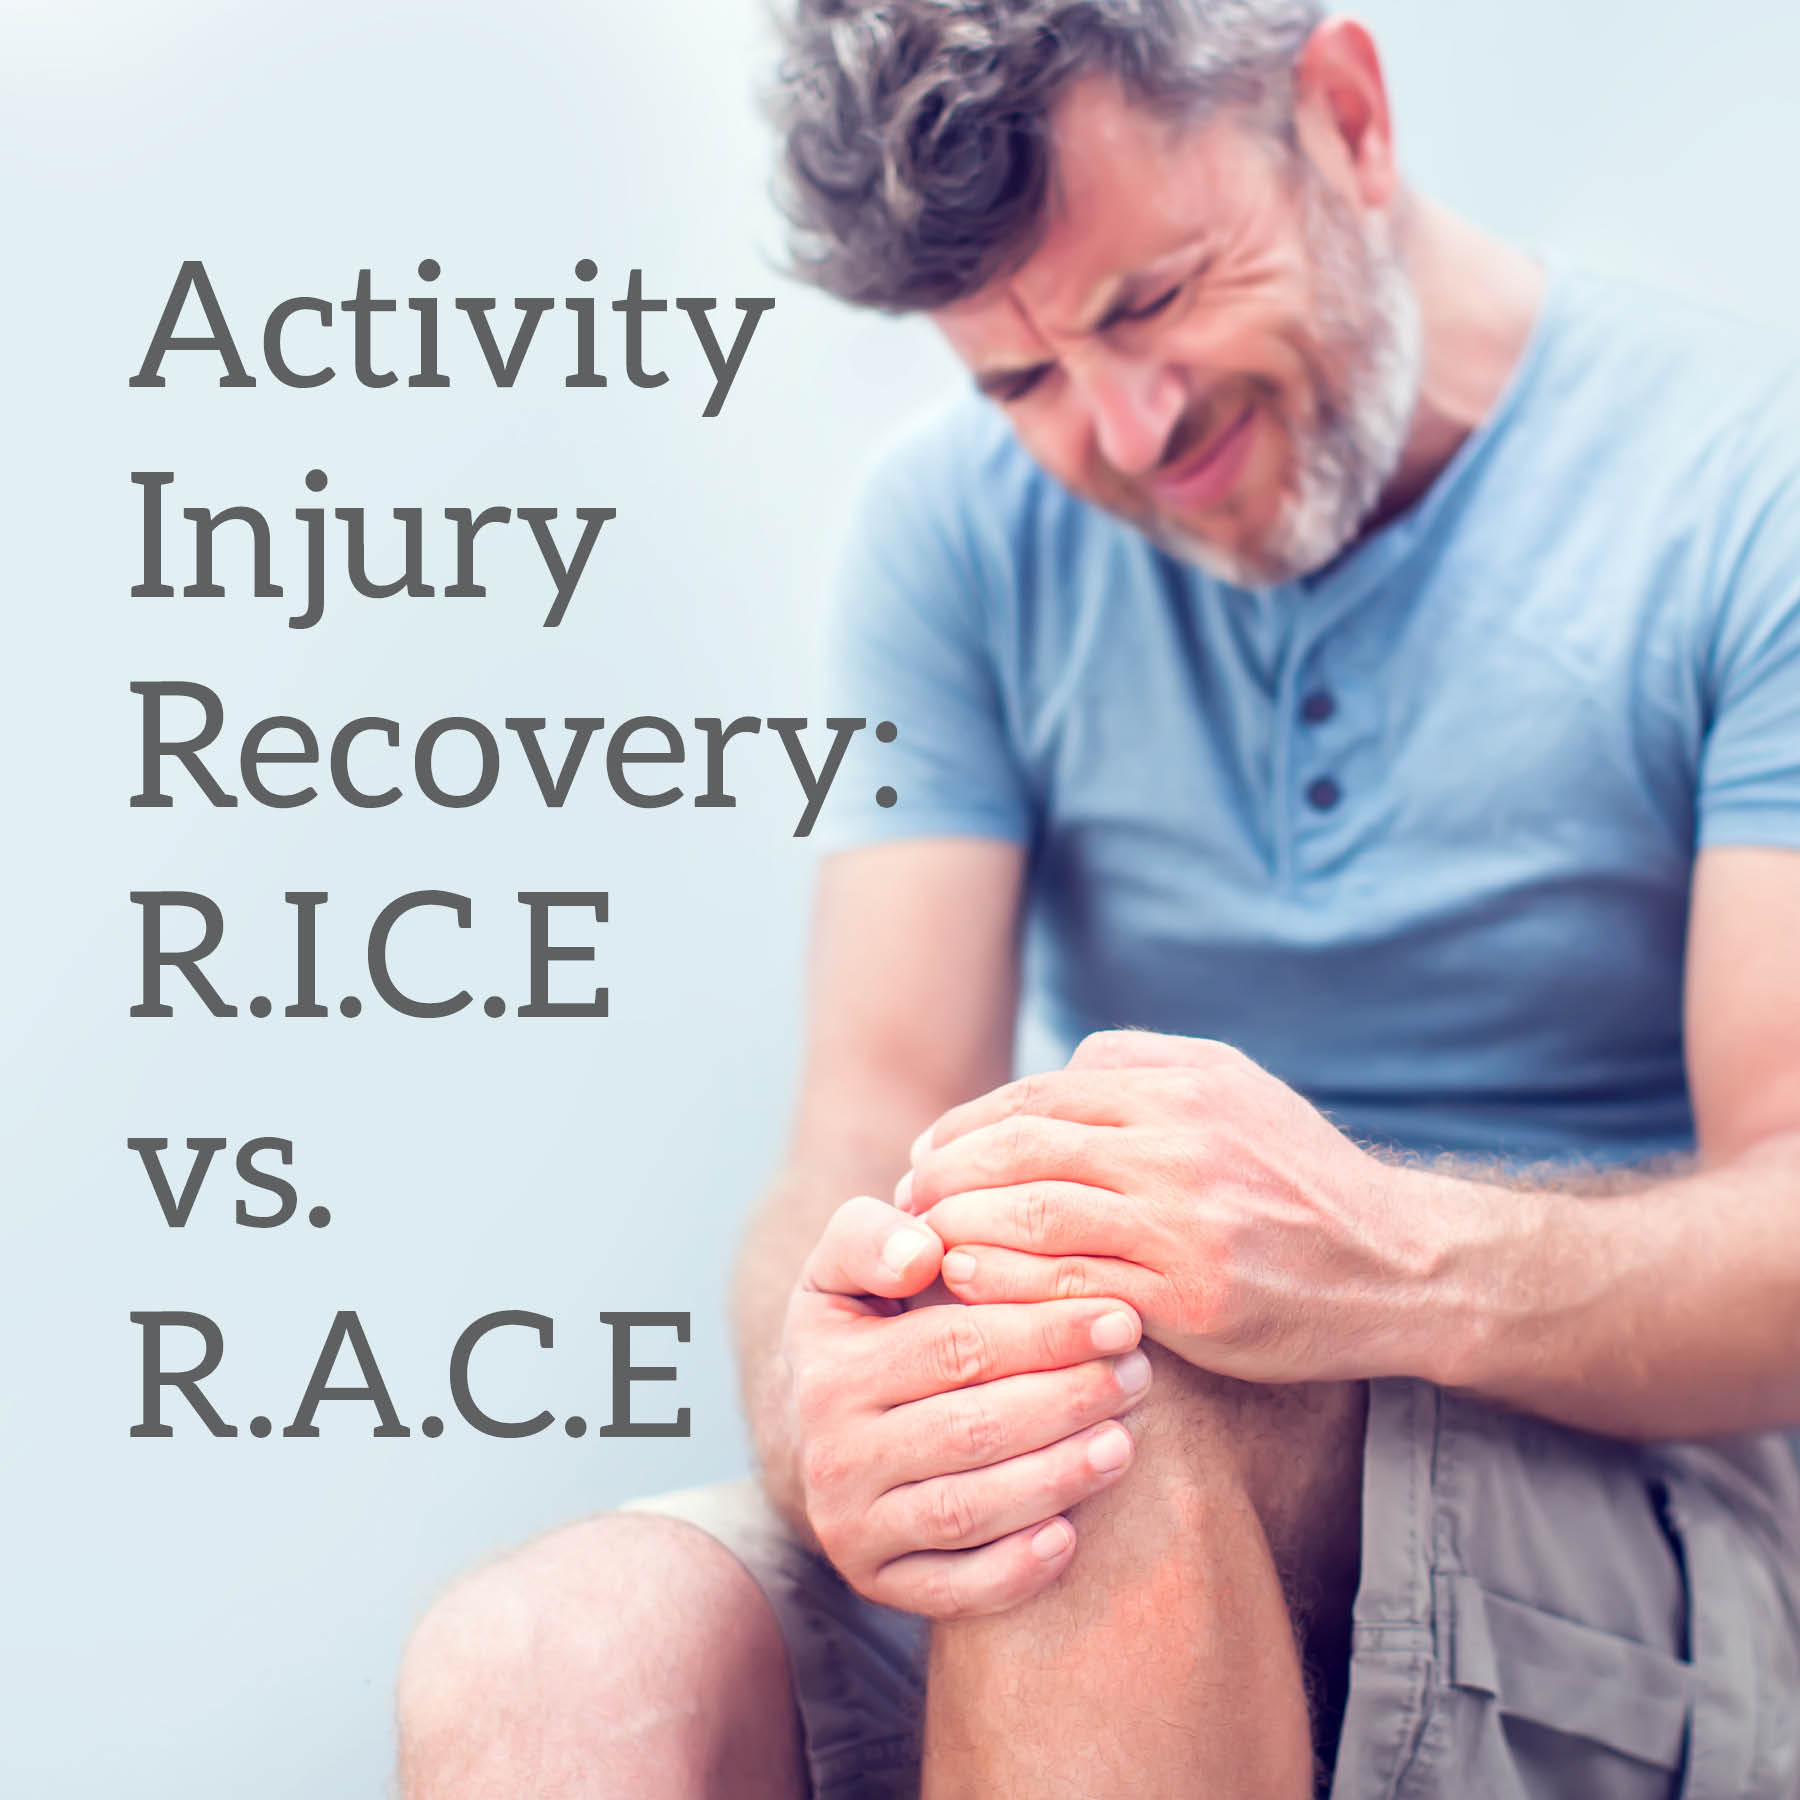 How to recover from injury